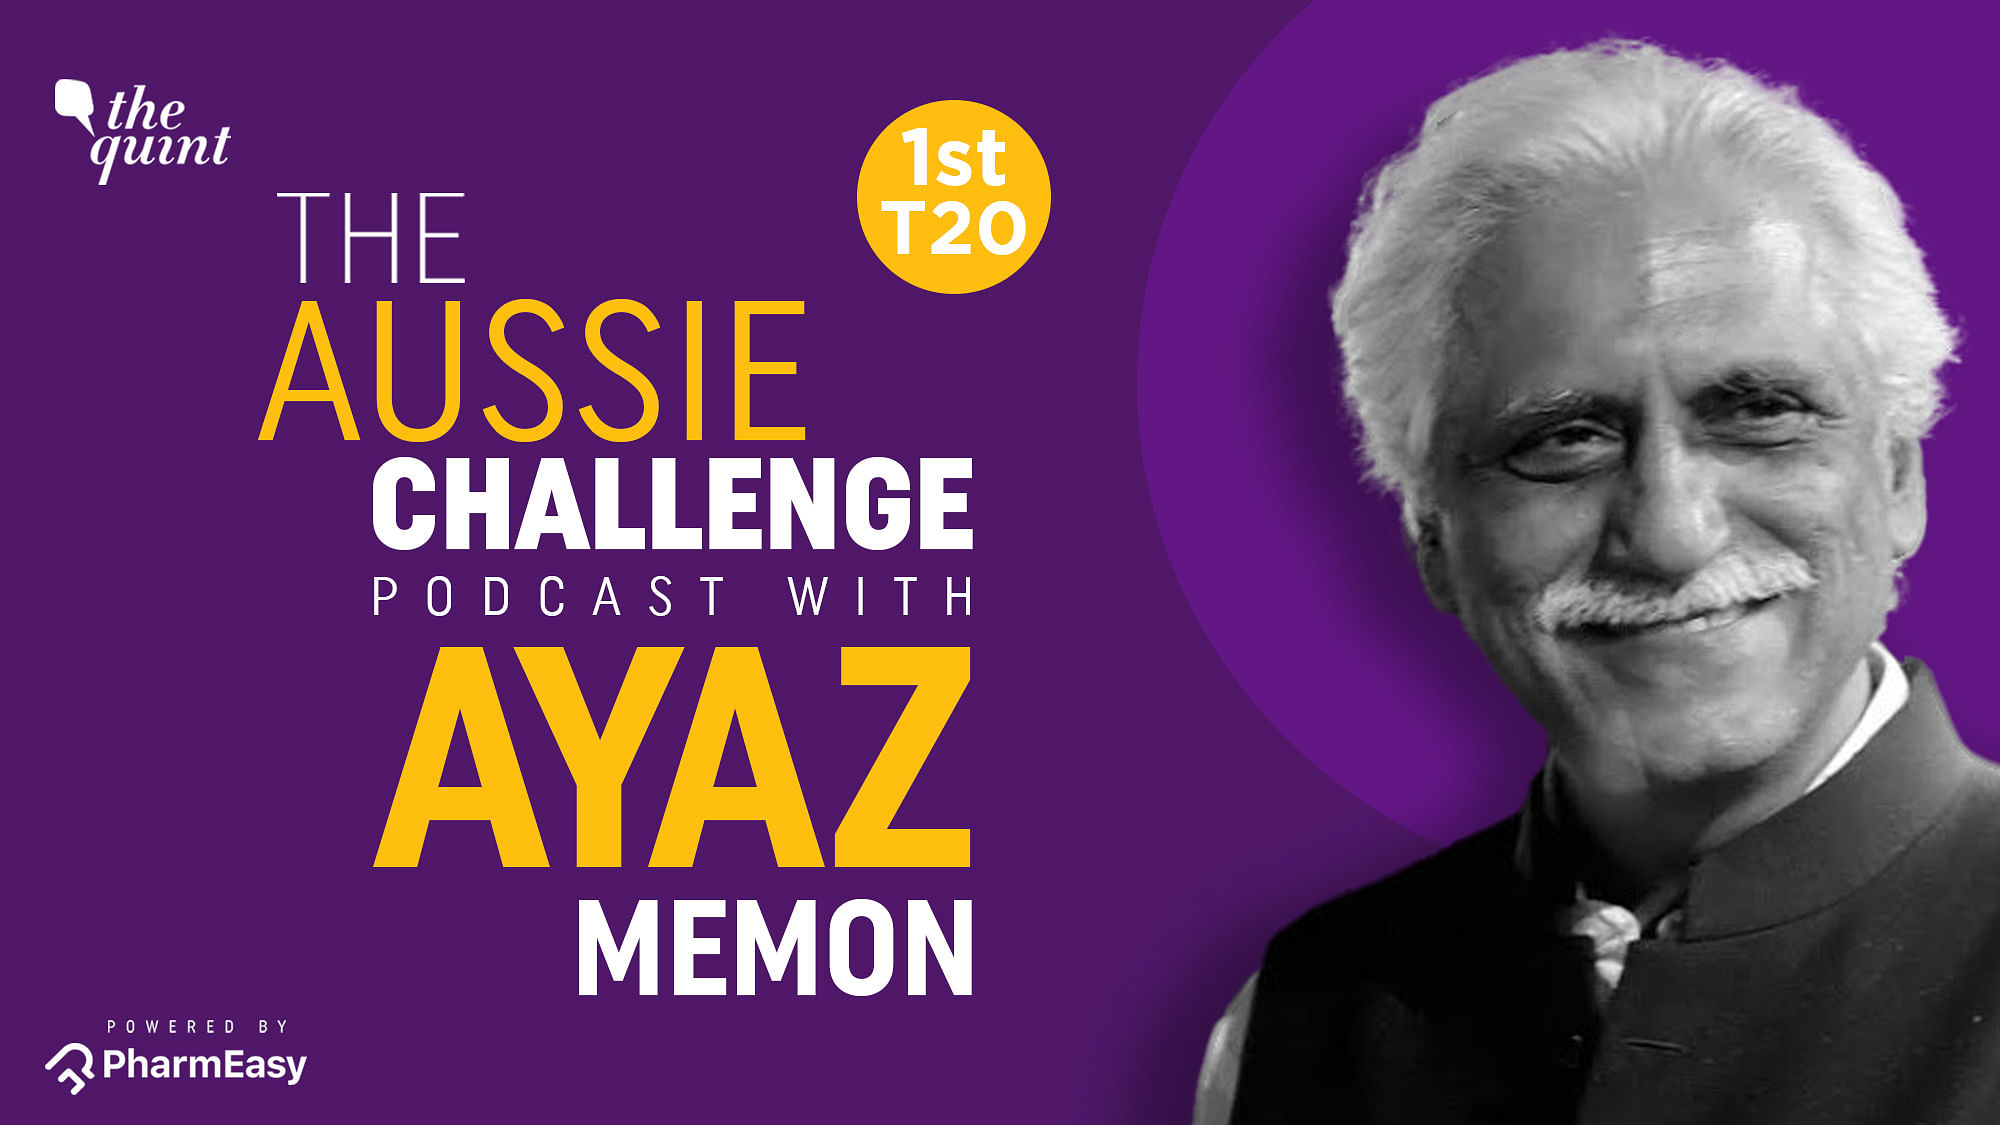 On Episode 4 of The Aussie Challenge Podcast With Ayaz Memon, we discuss India’s 11 run victory over Australia in the T20I series opener at Canberra.